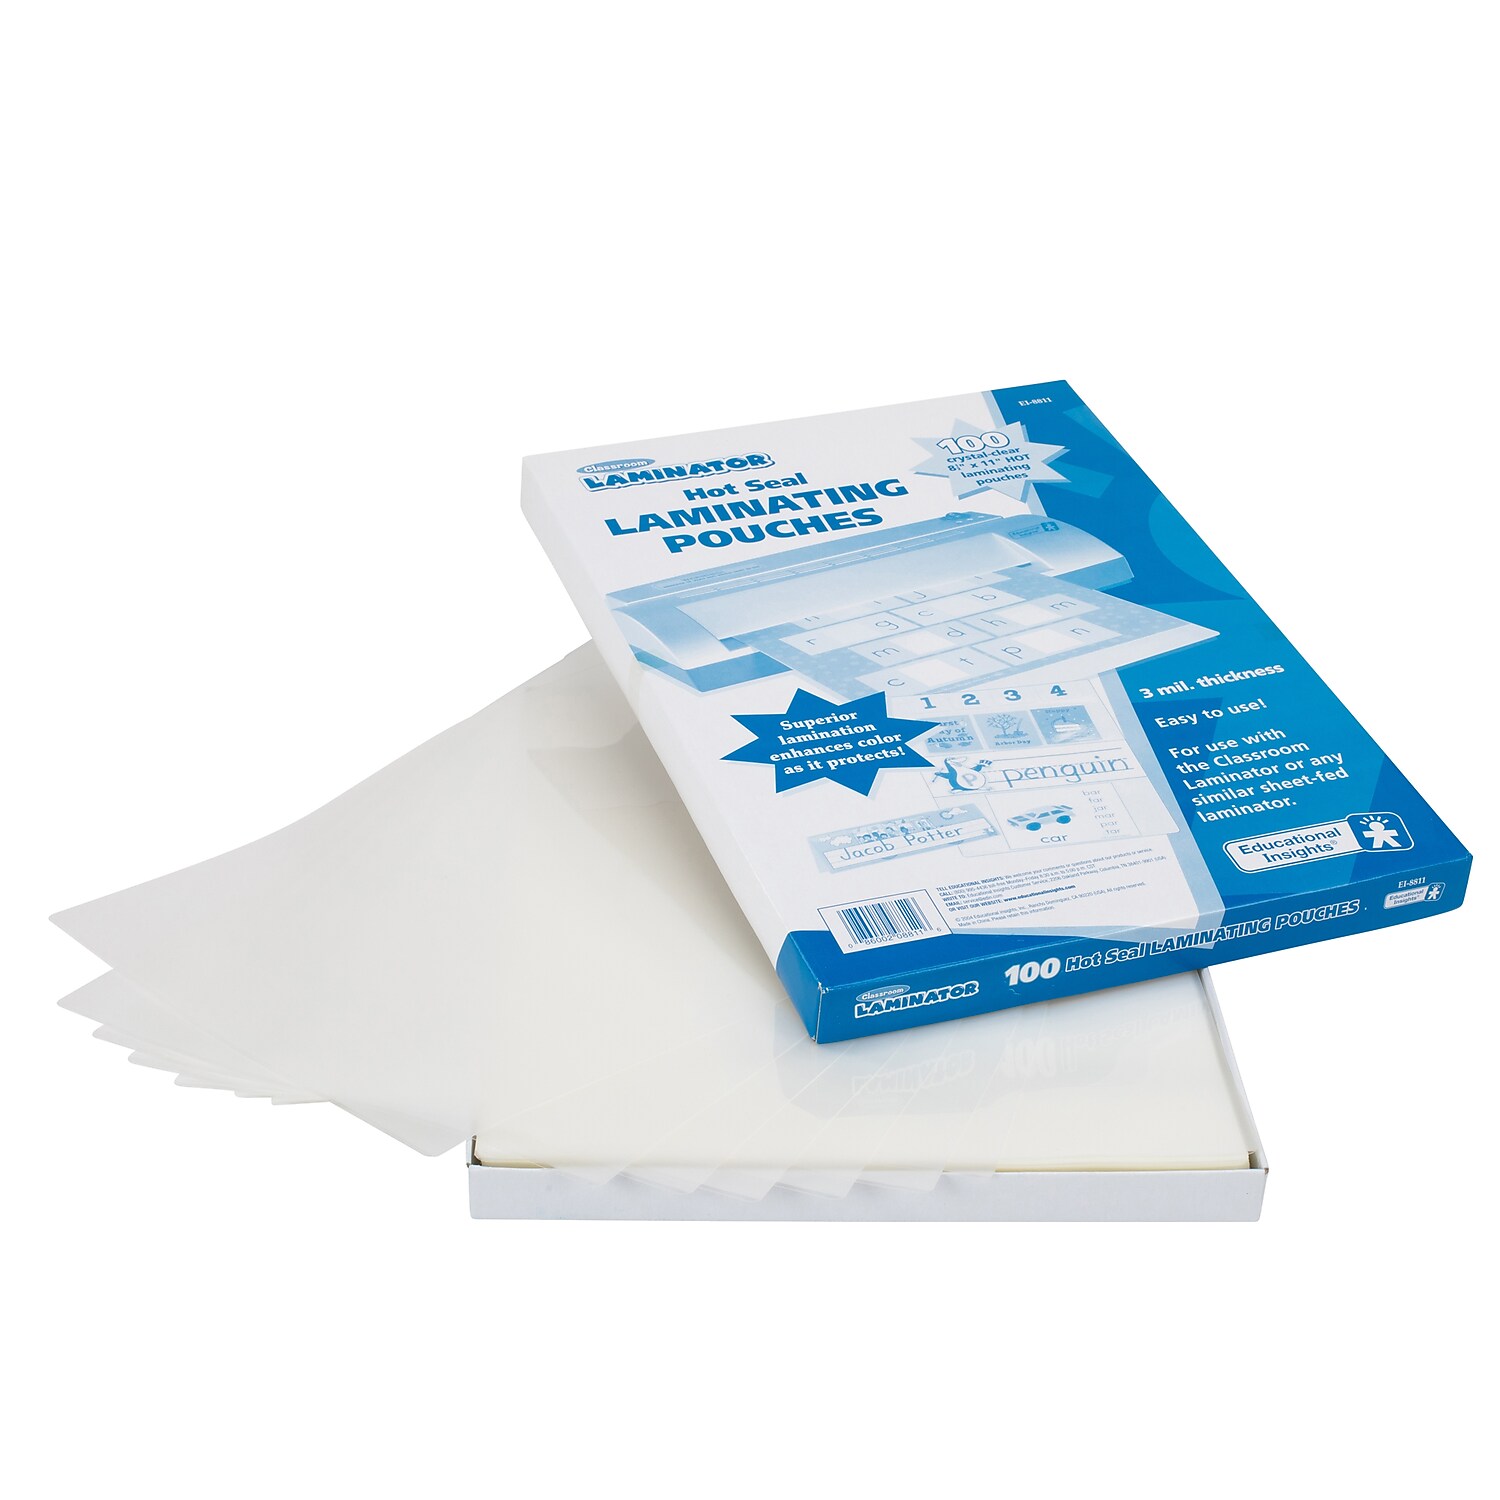 Hot Pouches Laminator - image 1 of 4